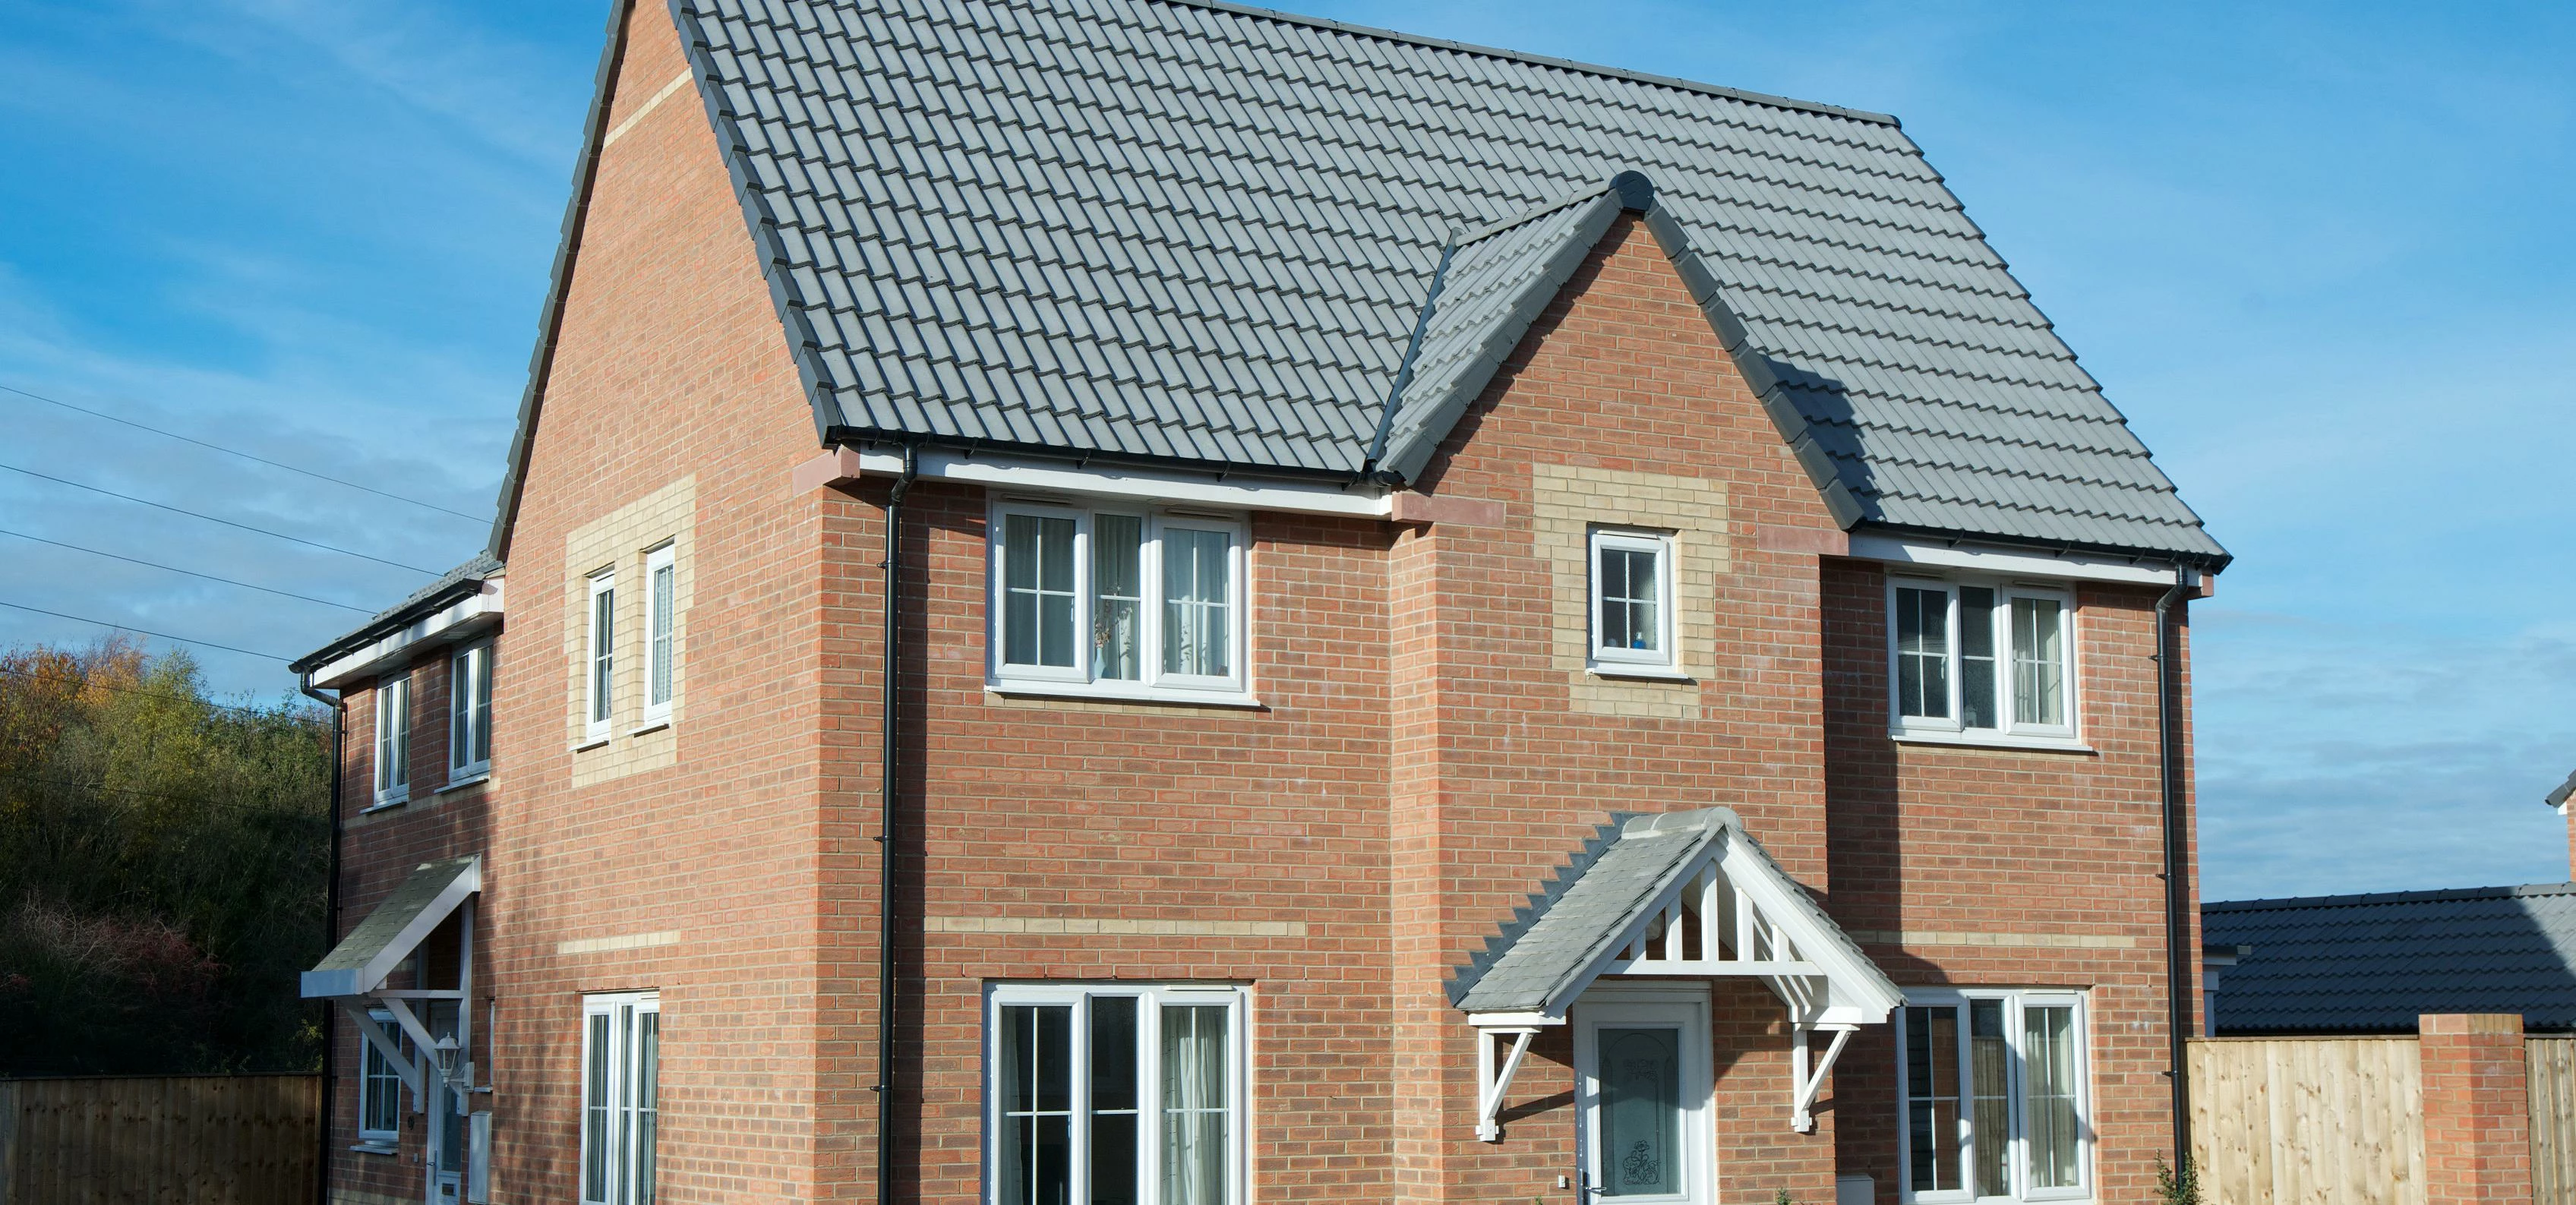 The last homes are now available at Barratt Homes' Meadow Walk development